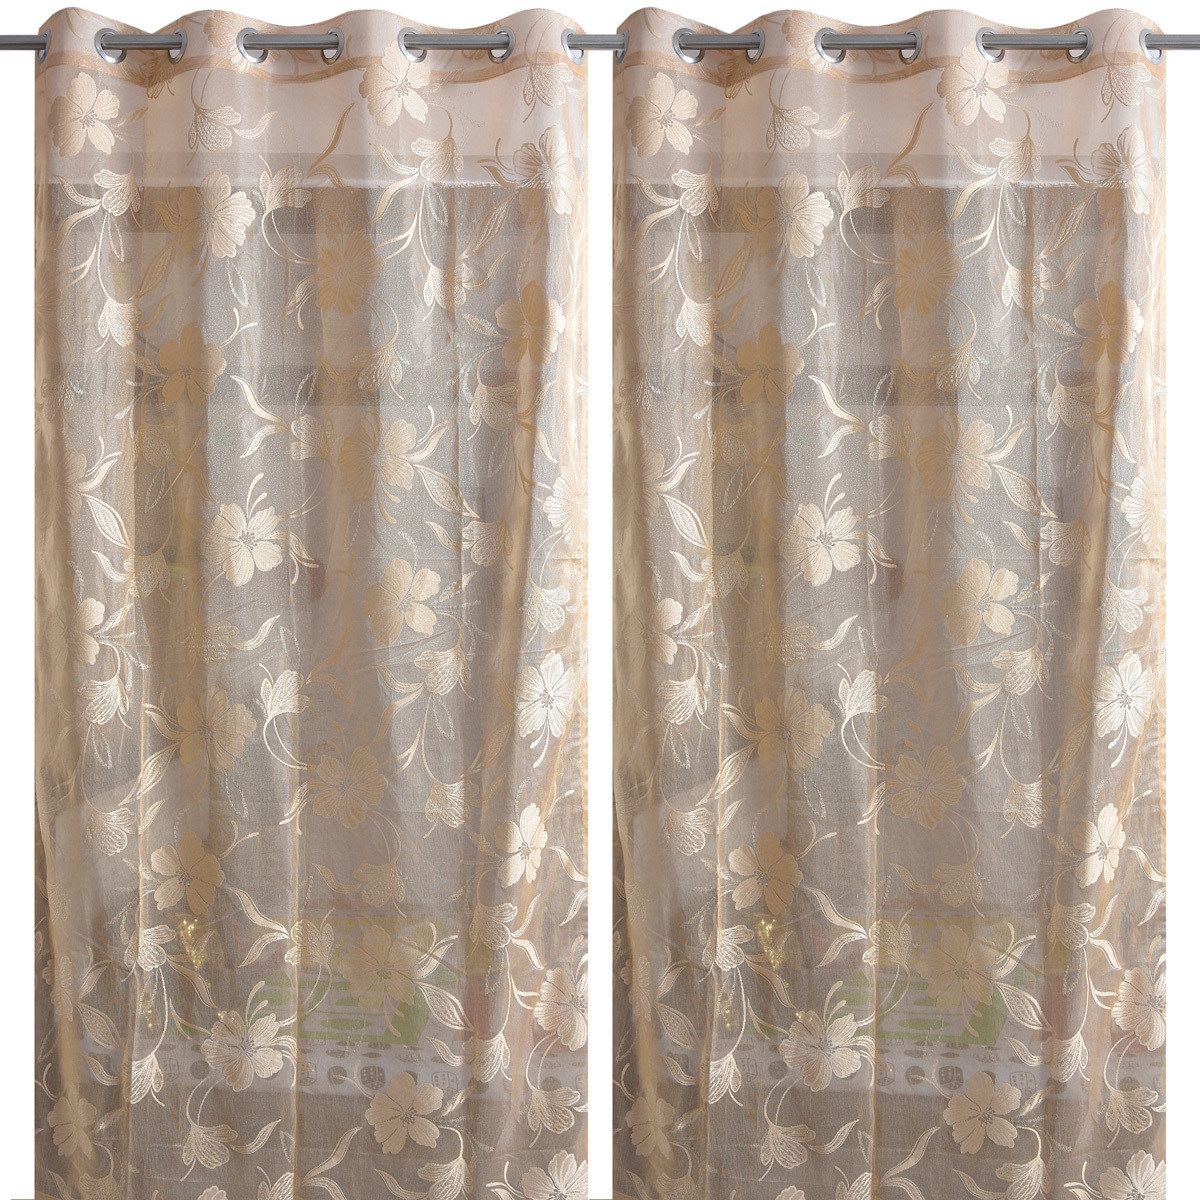 HANDTEX HOME Sheer Gold Net Curtains With Beautiful Embroidered Floral Designs for Door 4ft x 9ft Set of 2 SP02